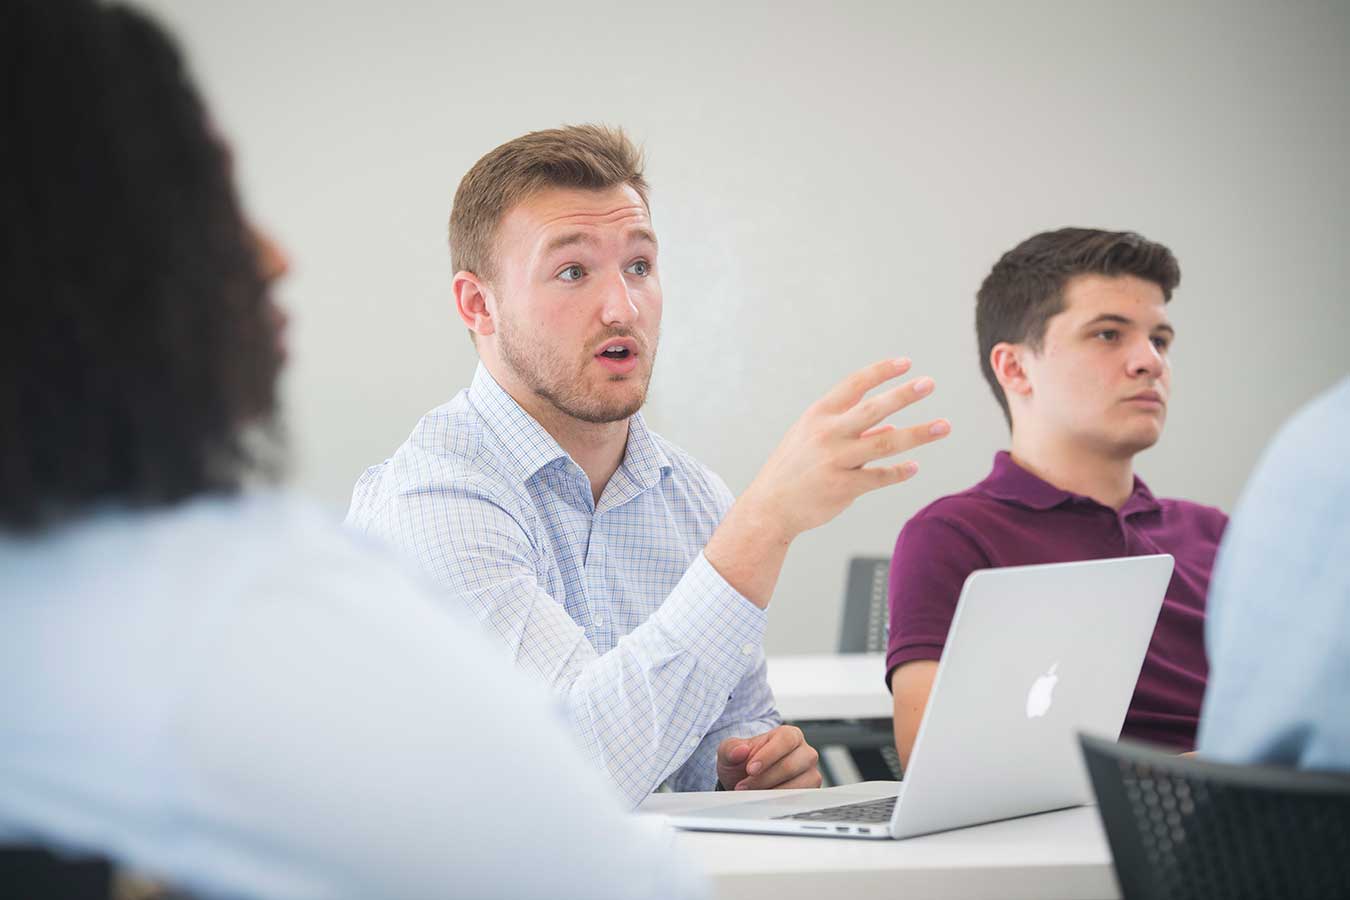 Man participating in class discussion